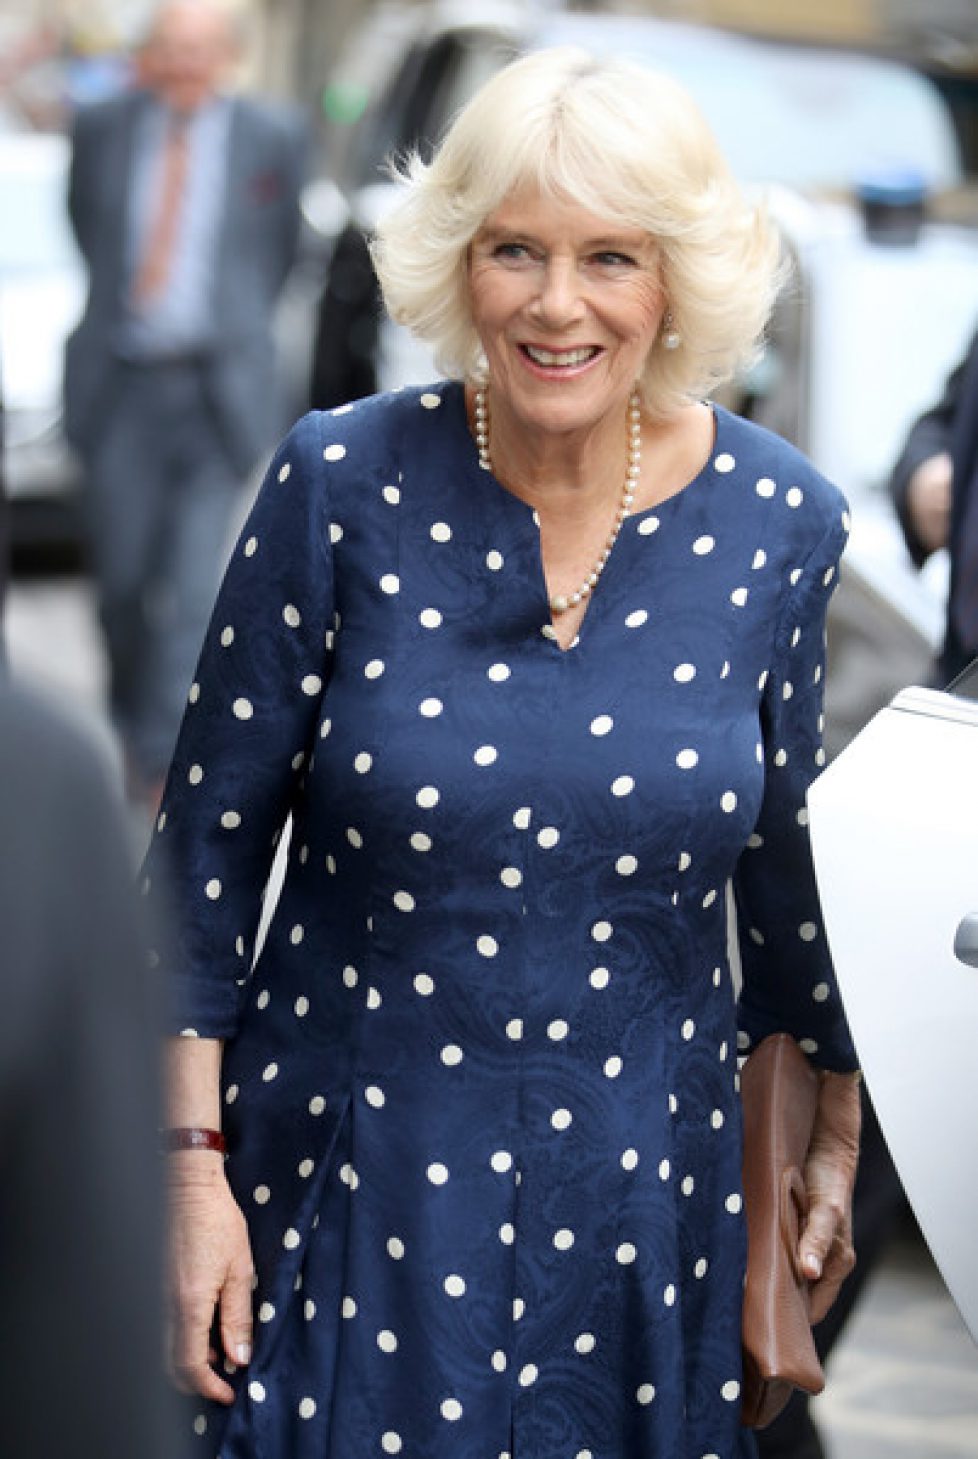 Prince+Wales+Duchess+Cornwall+Visit+Italy+L0yEUer18OXl